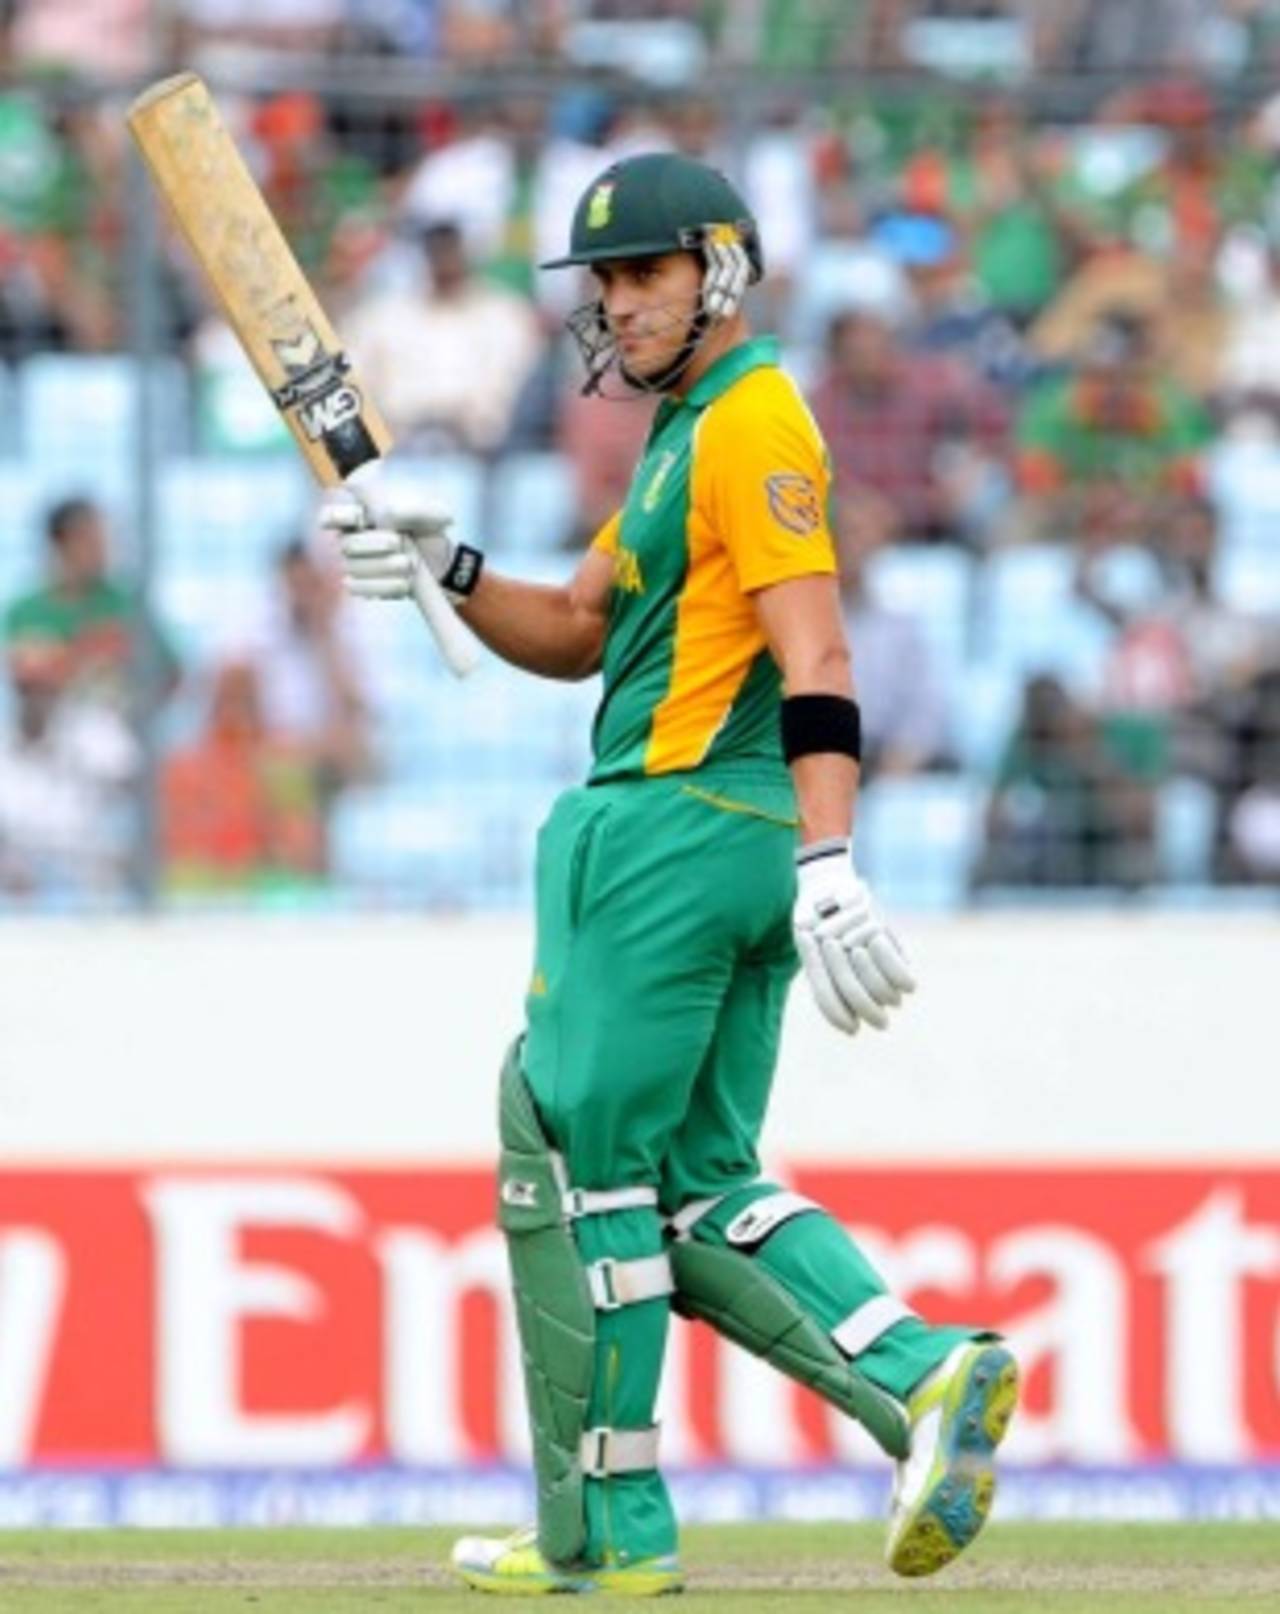 File photo: Faff du Plessis put in a good all-round performance for the Titans&nbsp;&nbsp;&bull;&nbsp;&nbsp;Getty Images